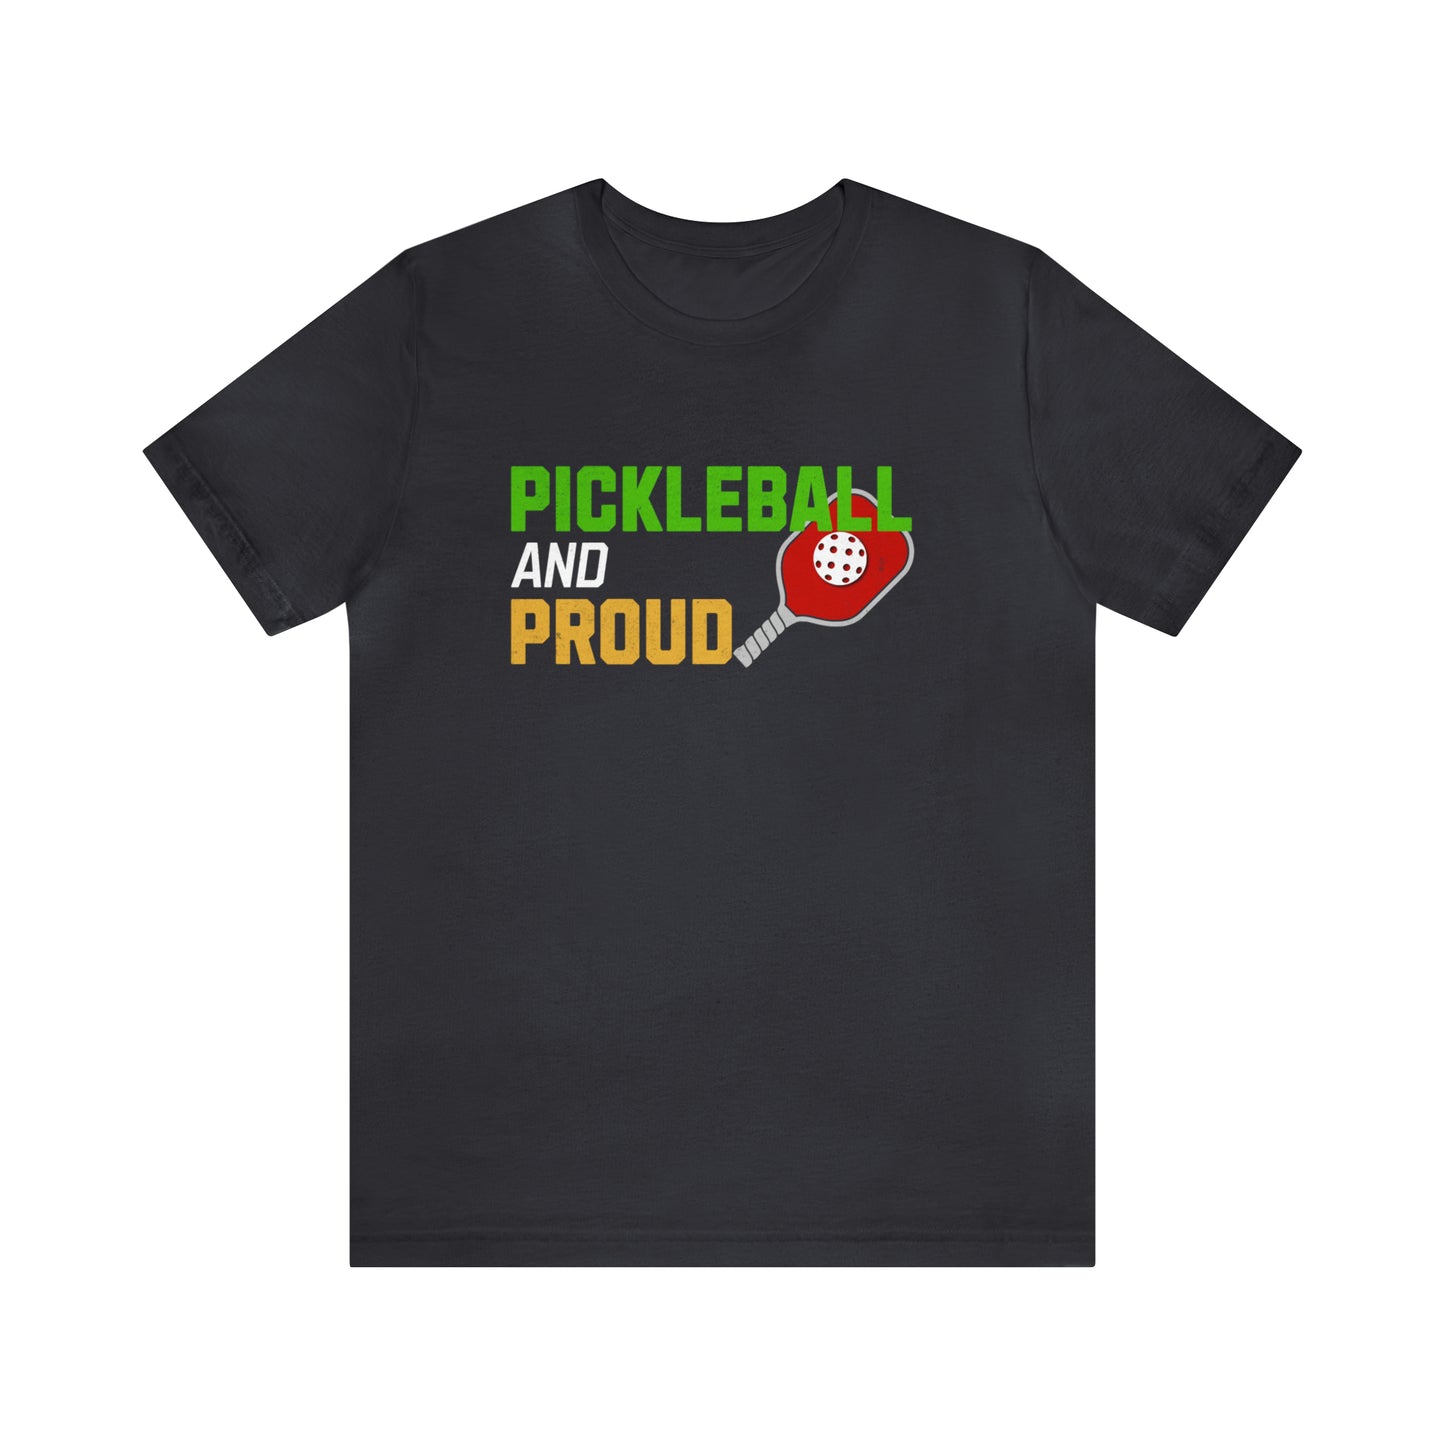 Pickleball and Proud: Cotton Shirt for Passionate Players